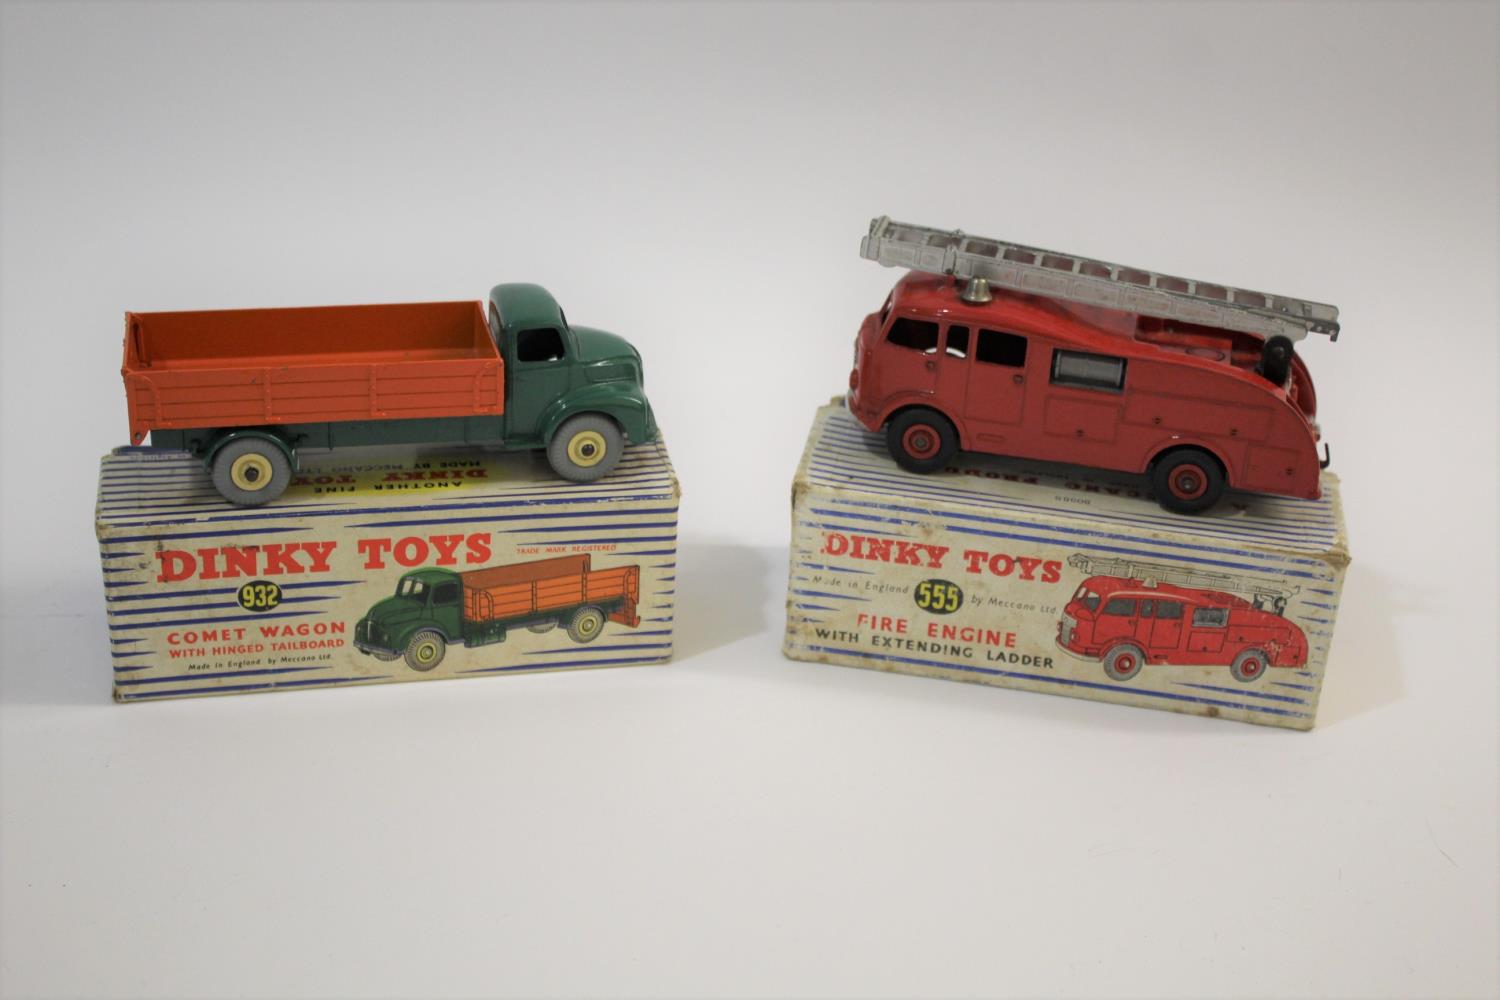 DINKY TOYS - COMET WAGON a boxed Dinky Toys 932 Comet Wagon with green cab and orange tailboard.